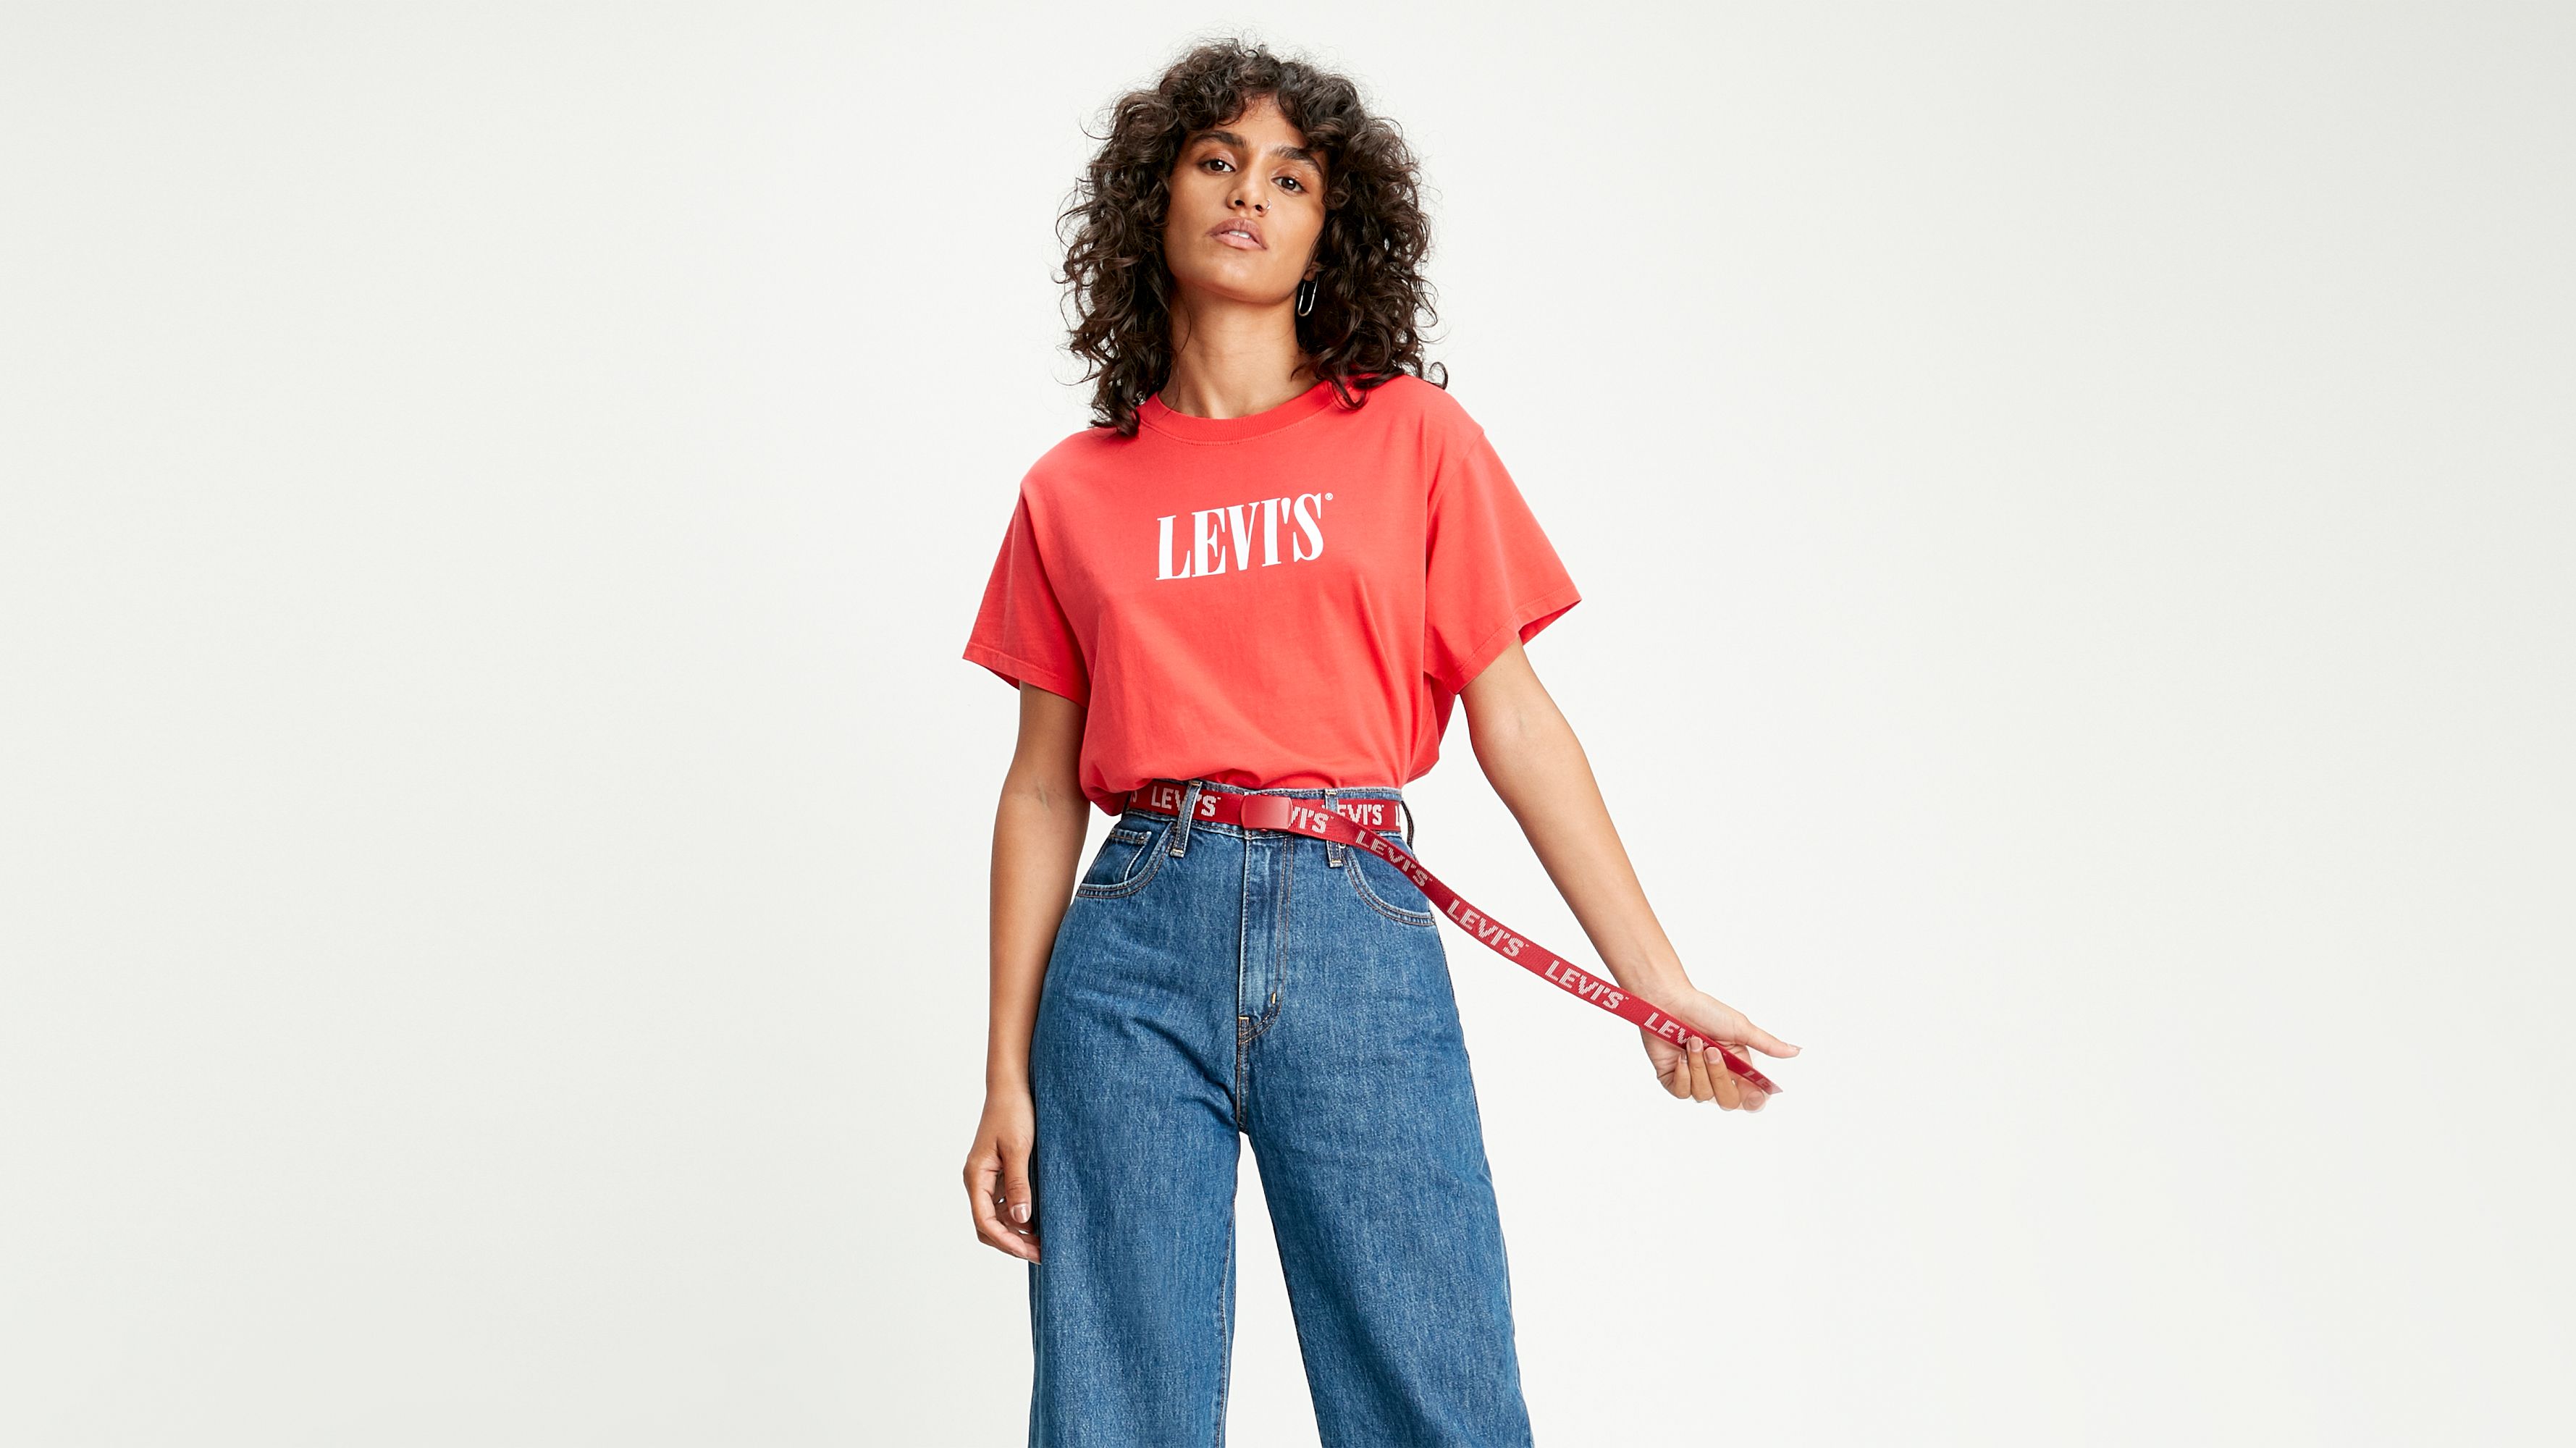 levis 301 shaping skinny